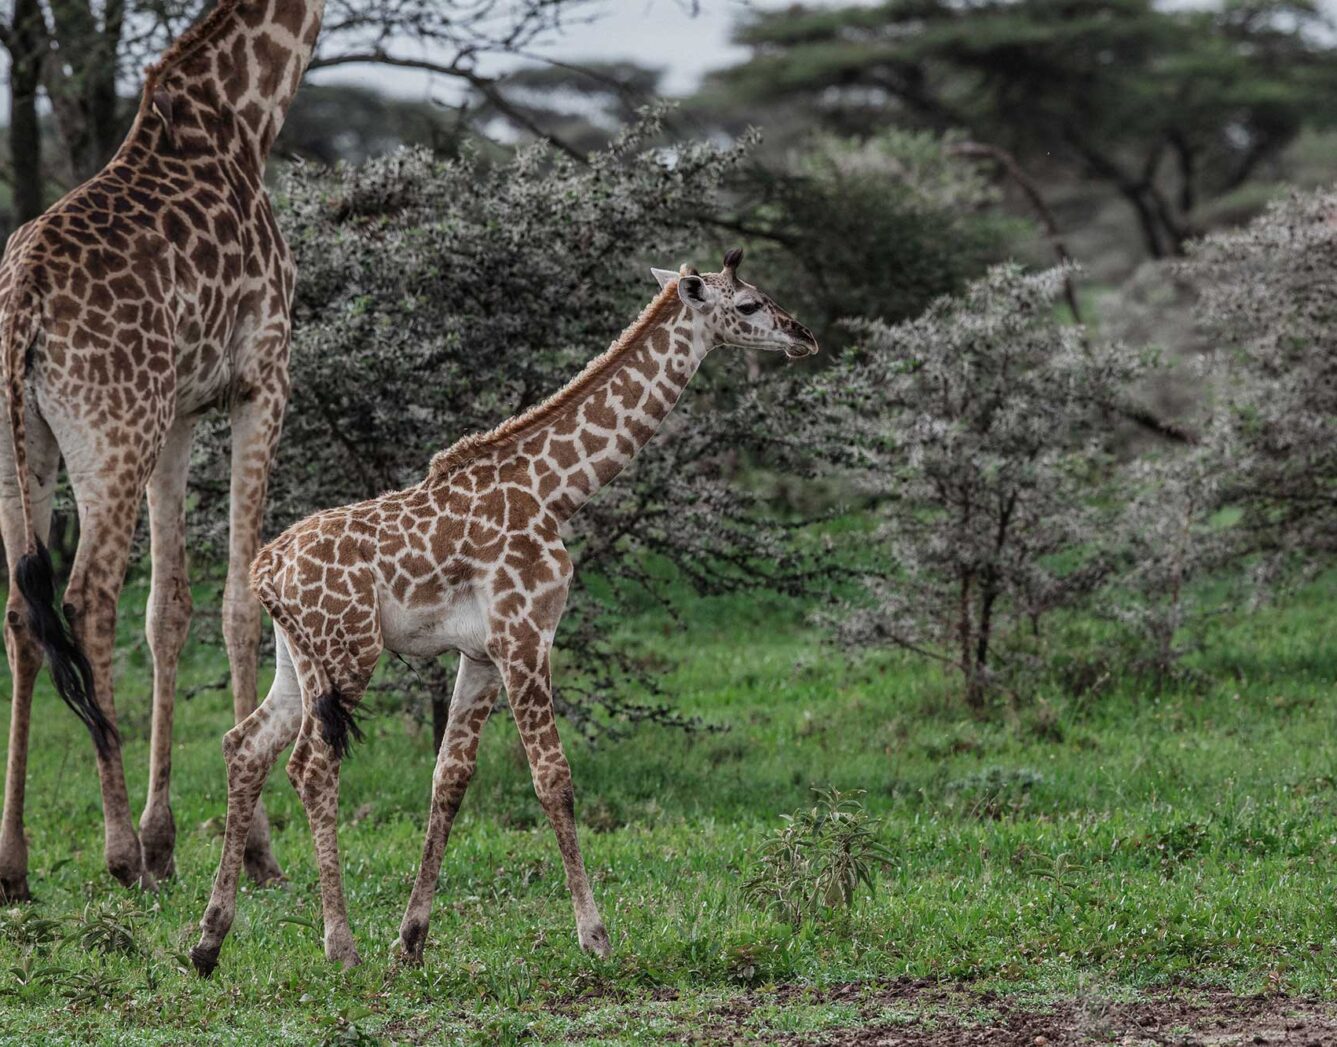 A young giraffe walks past it's mother